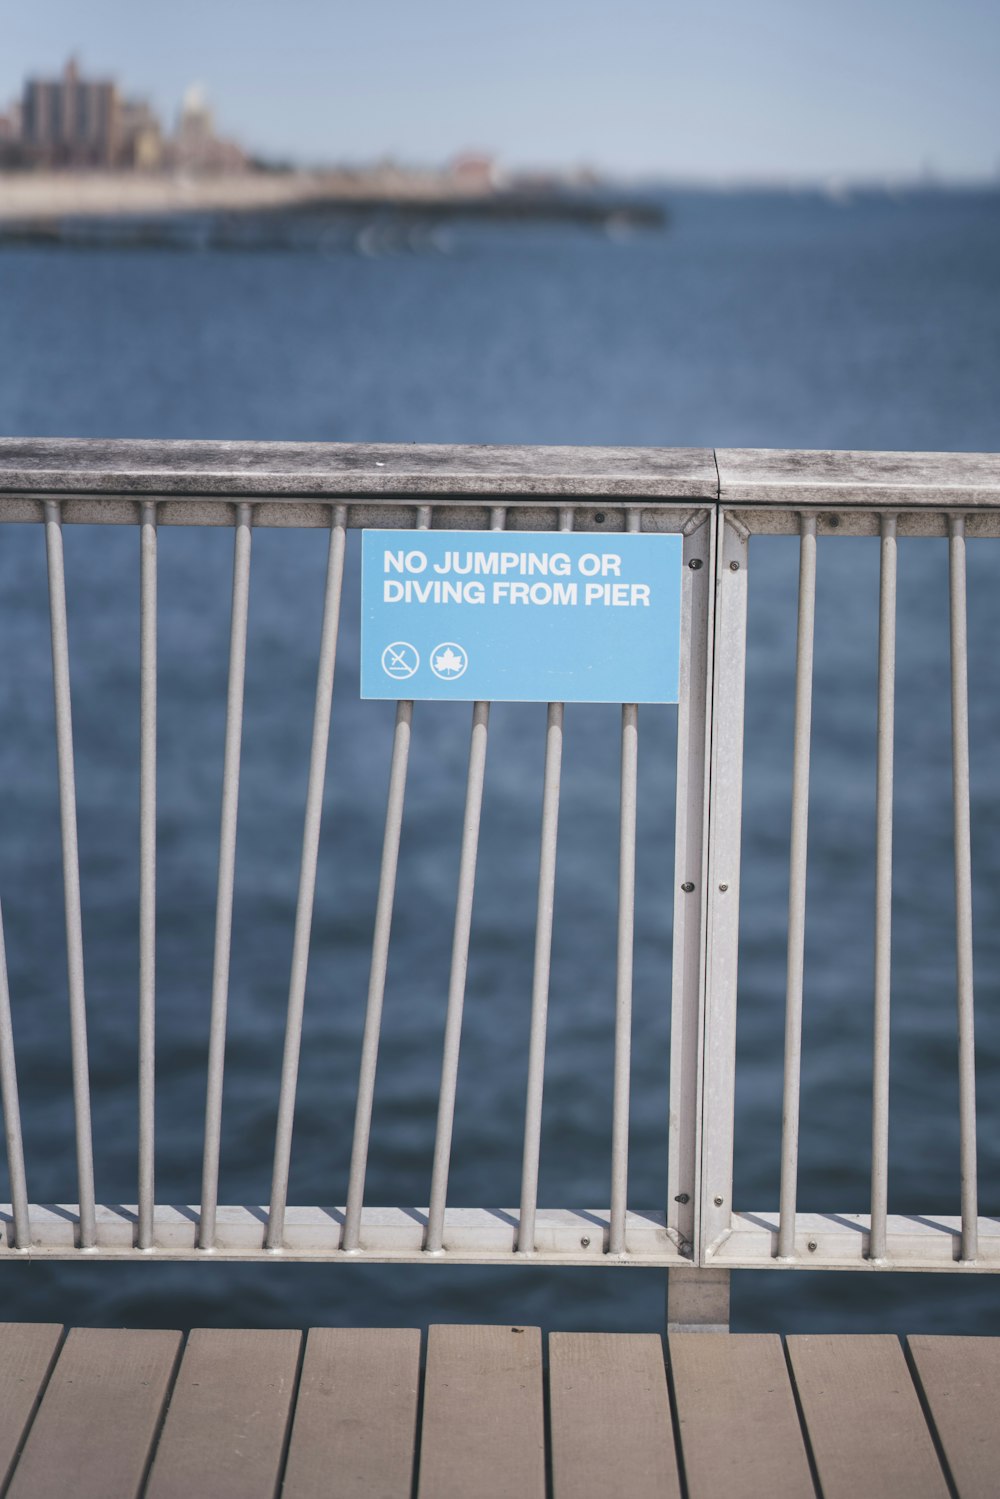 No jumping or diving from pier sign on metal fence